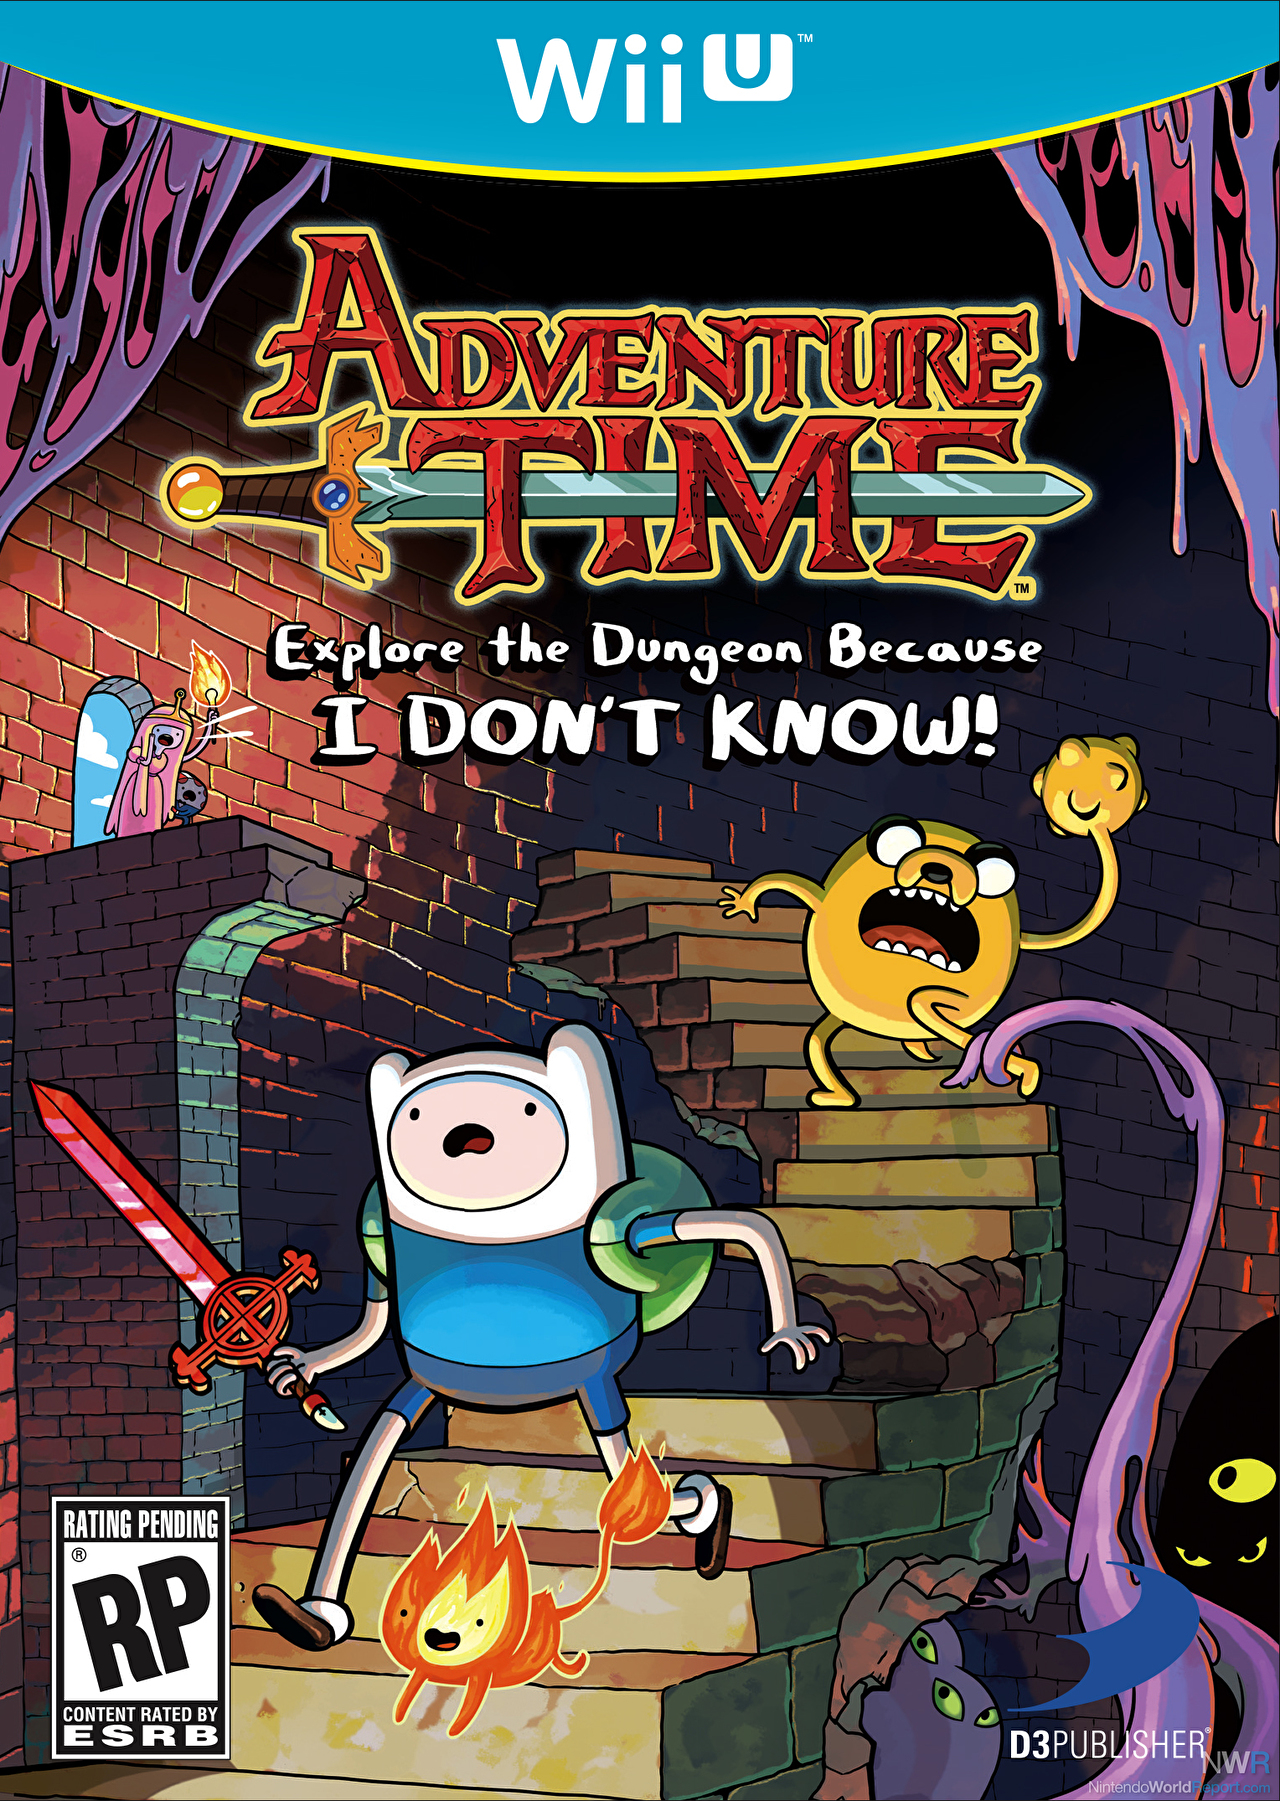 Adventure Time: Explore the Dungeon Because I Don't Know (Wiiu), Way Forward